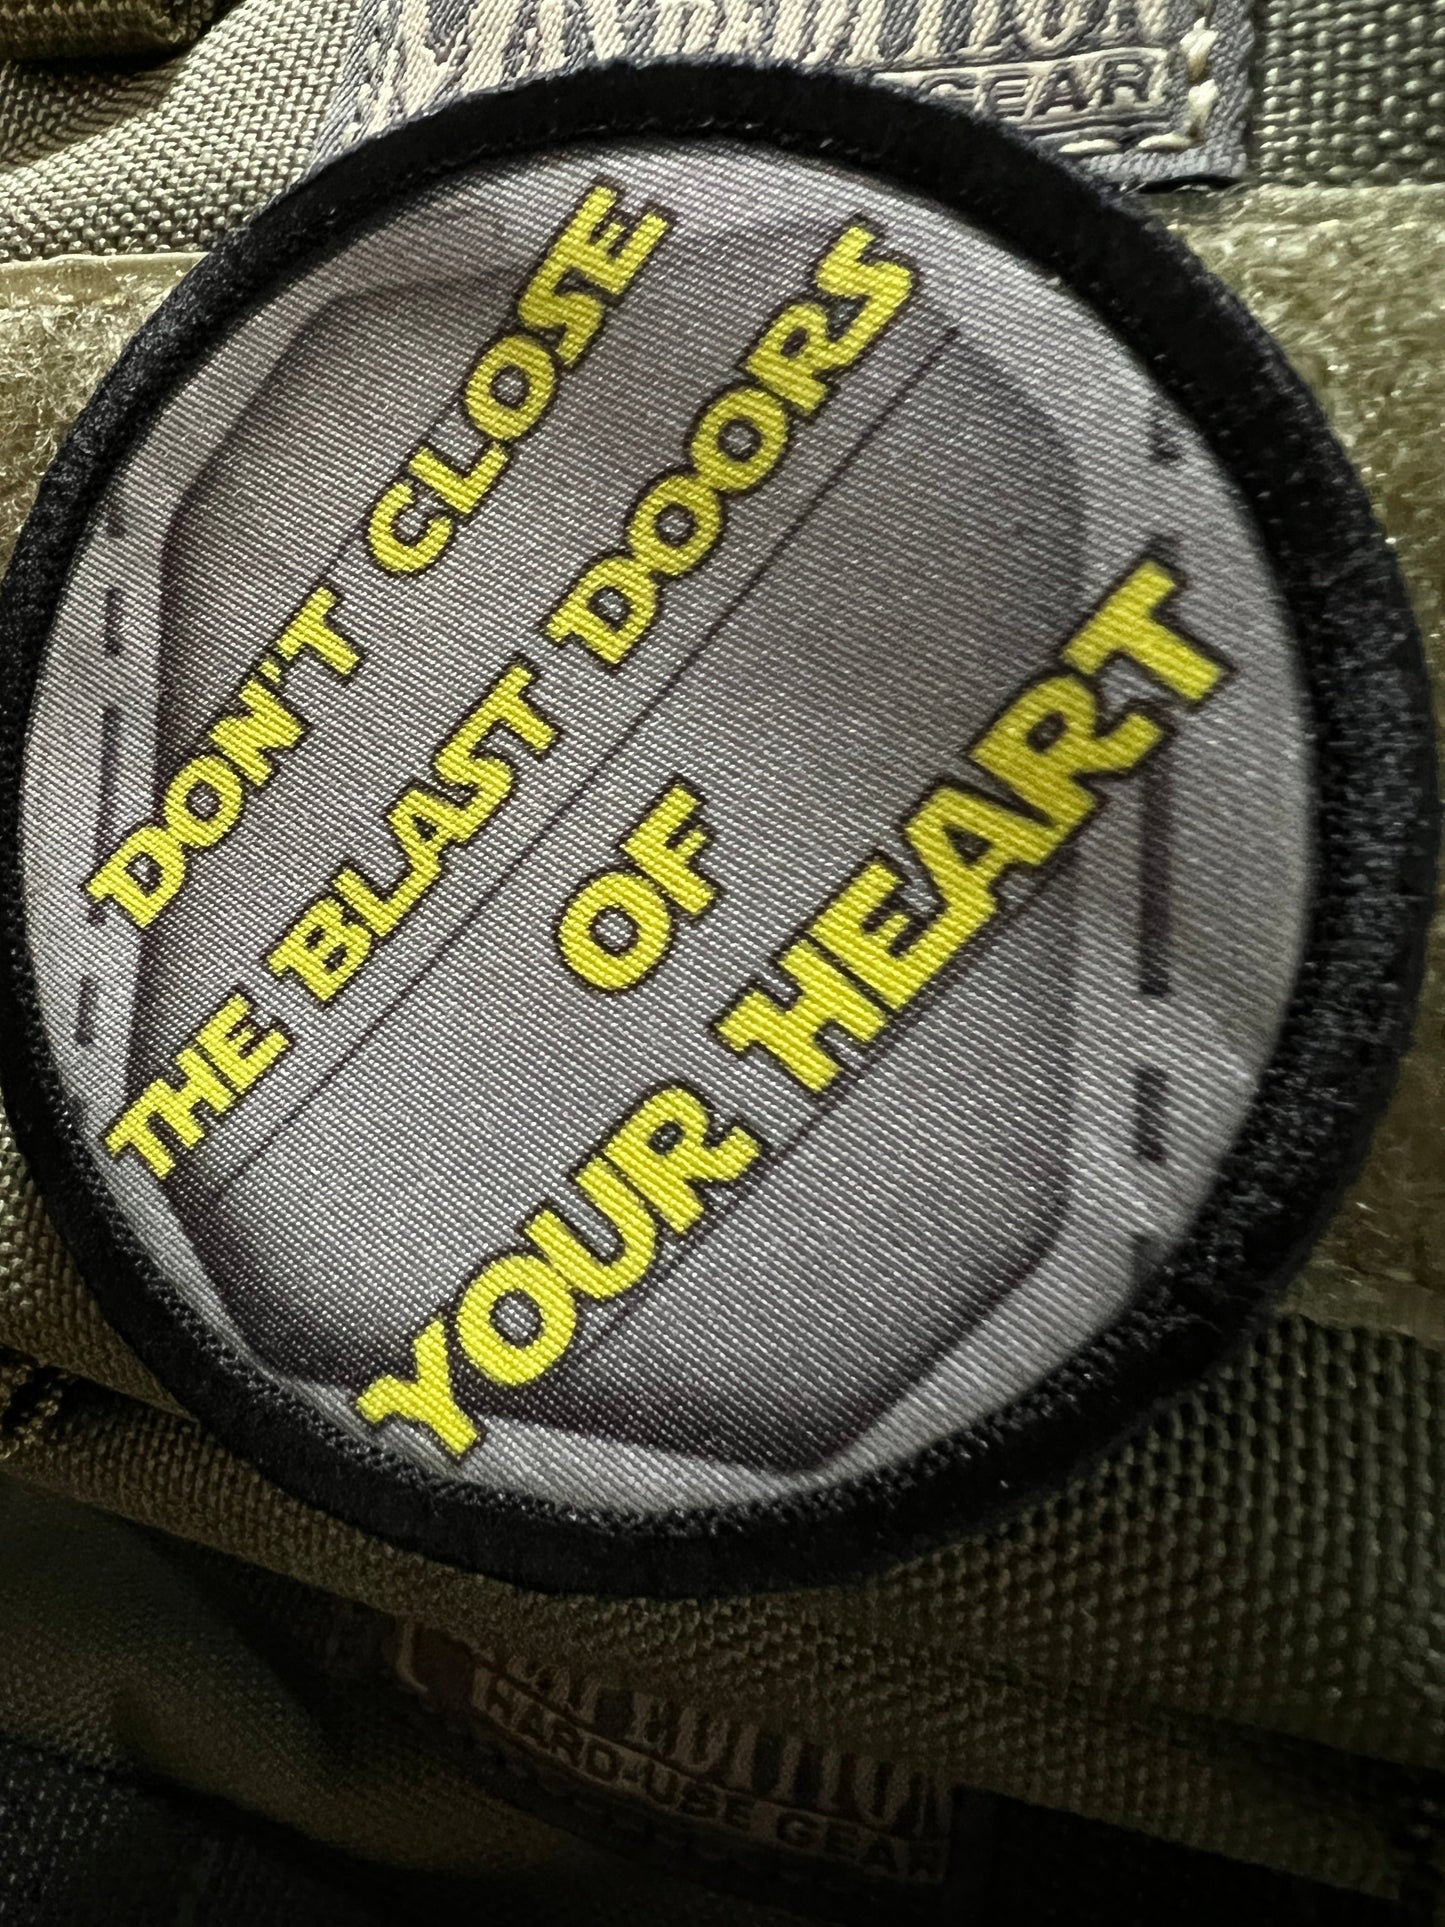 Don't Close the Blast Doors Of You Heart3